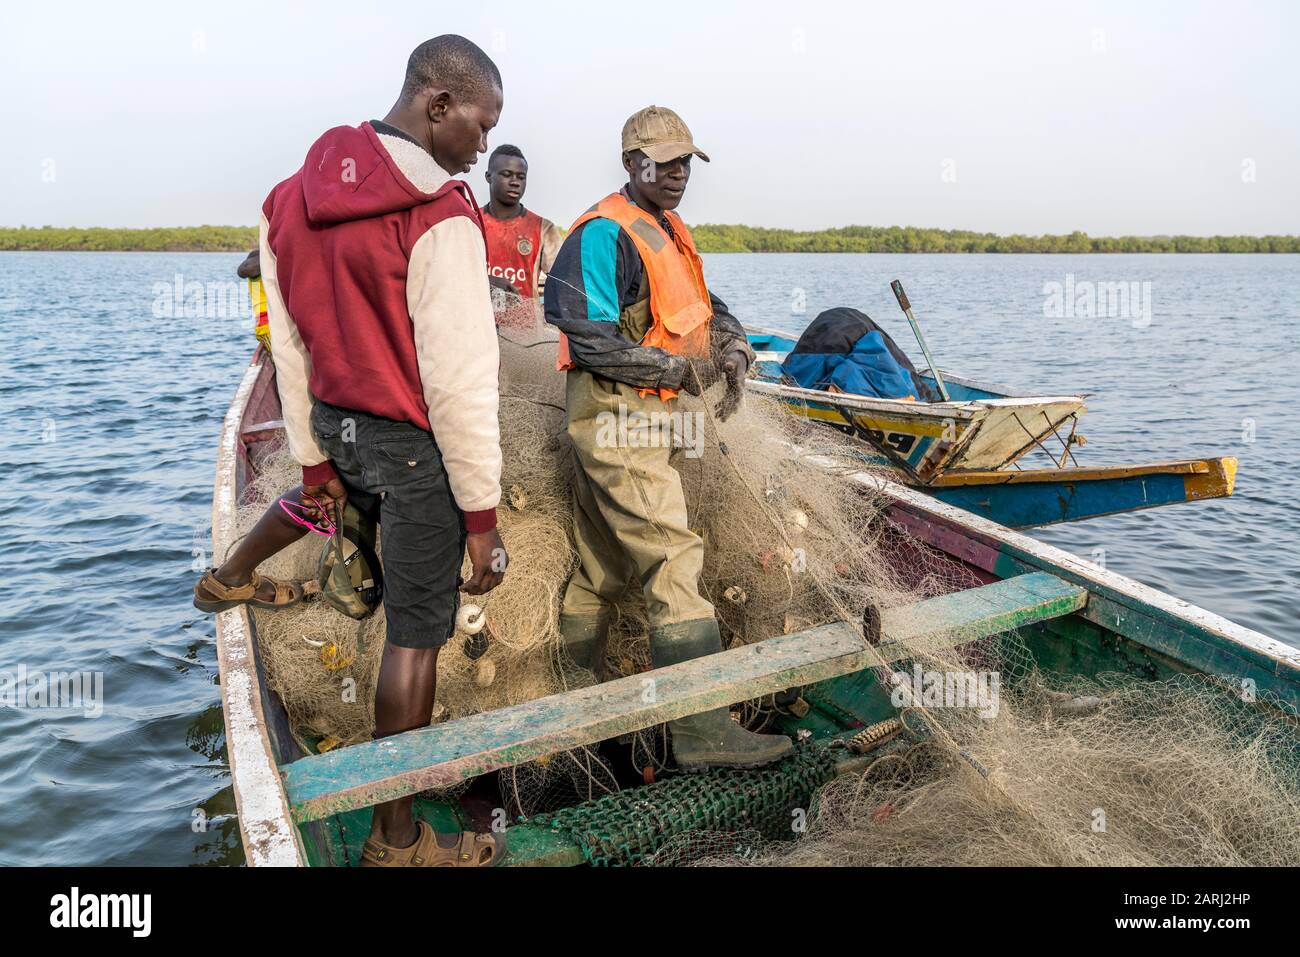 Fischer mit Netz in Ihrem Boot am Flussufer, Insel Jinack Island, Gambia, Westafrika  |  fishermen with net on their boat at the river shore, Jinack I Stock Photo